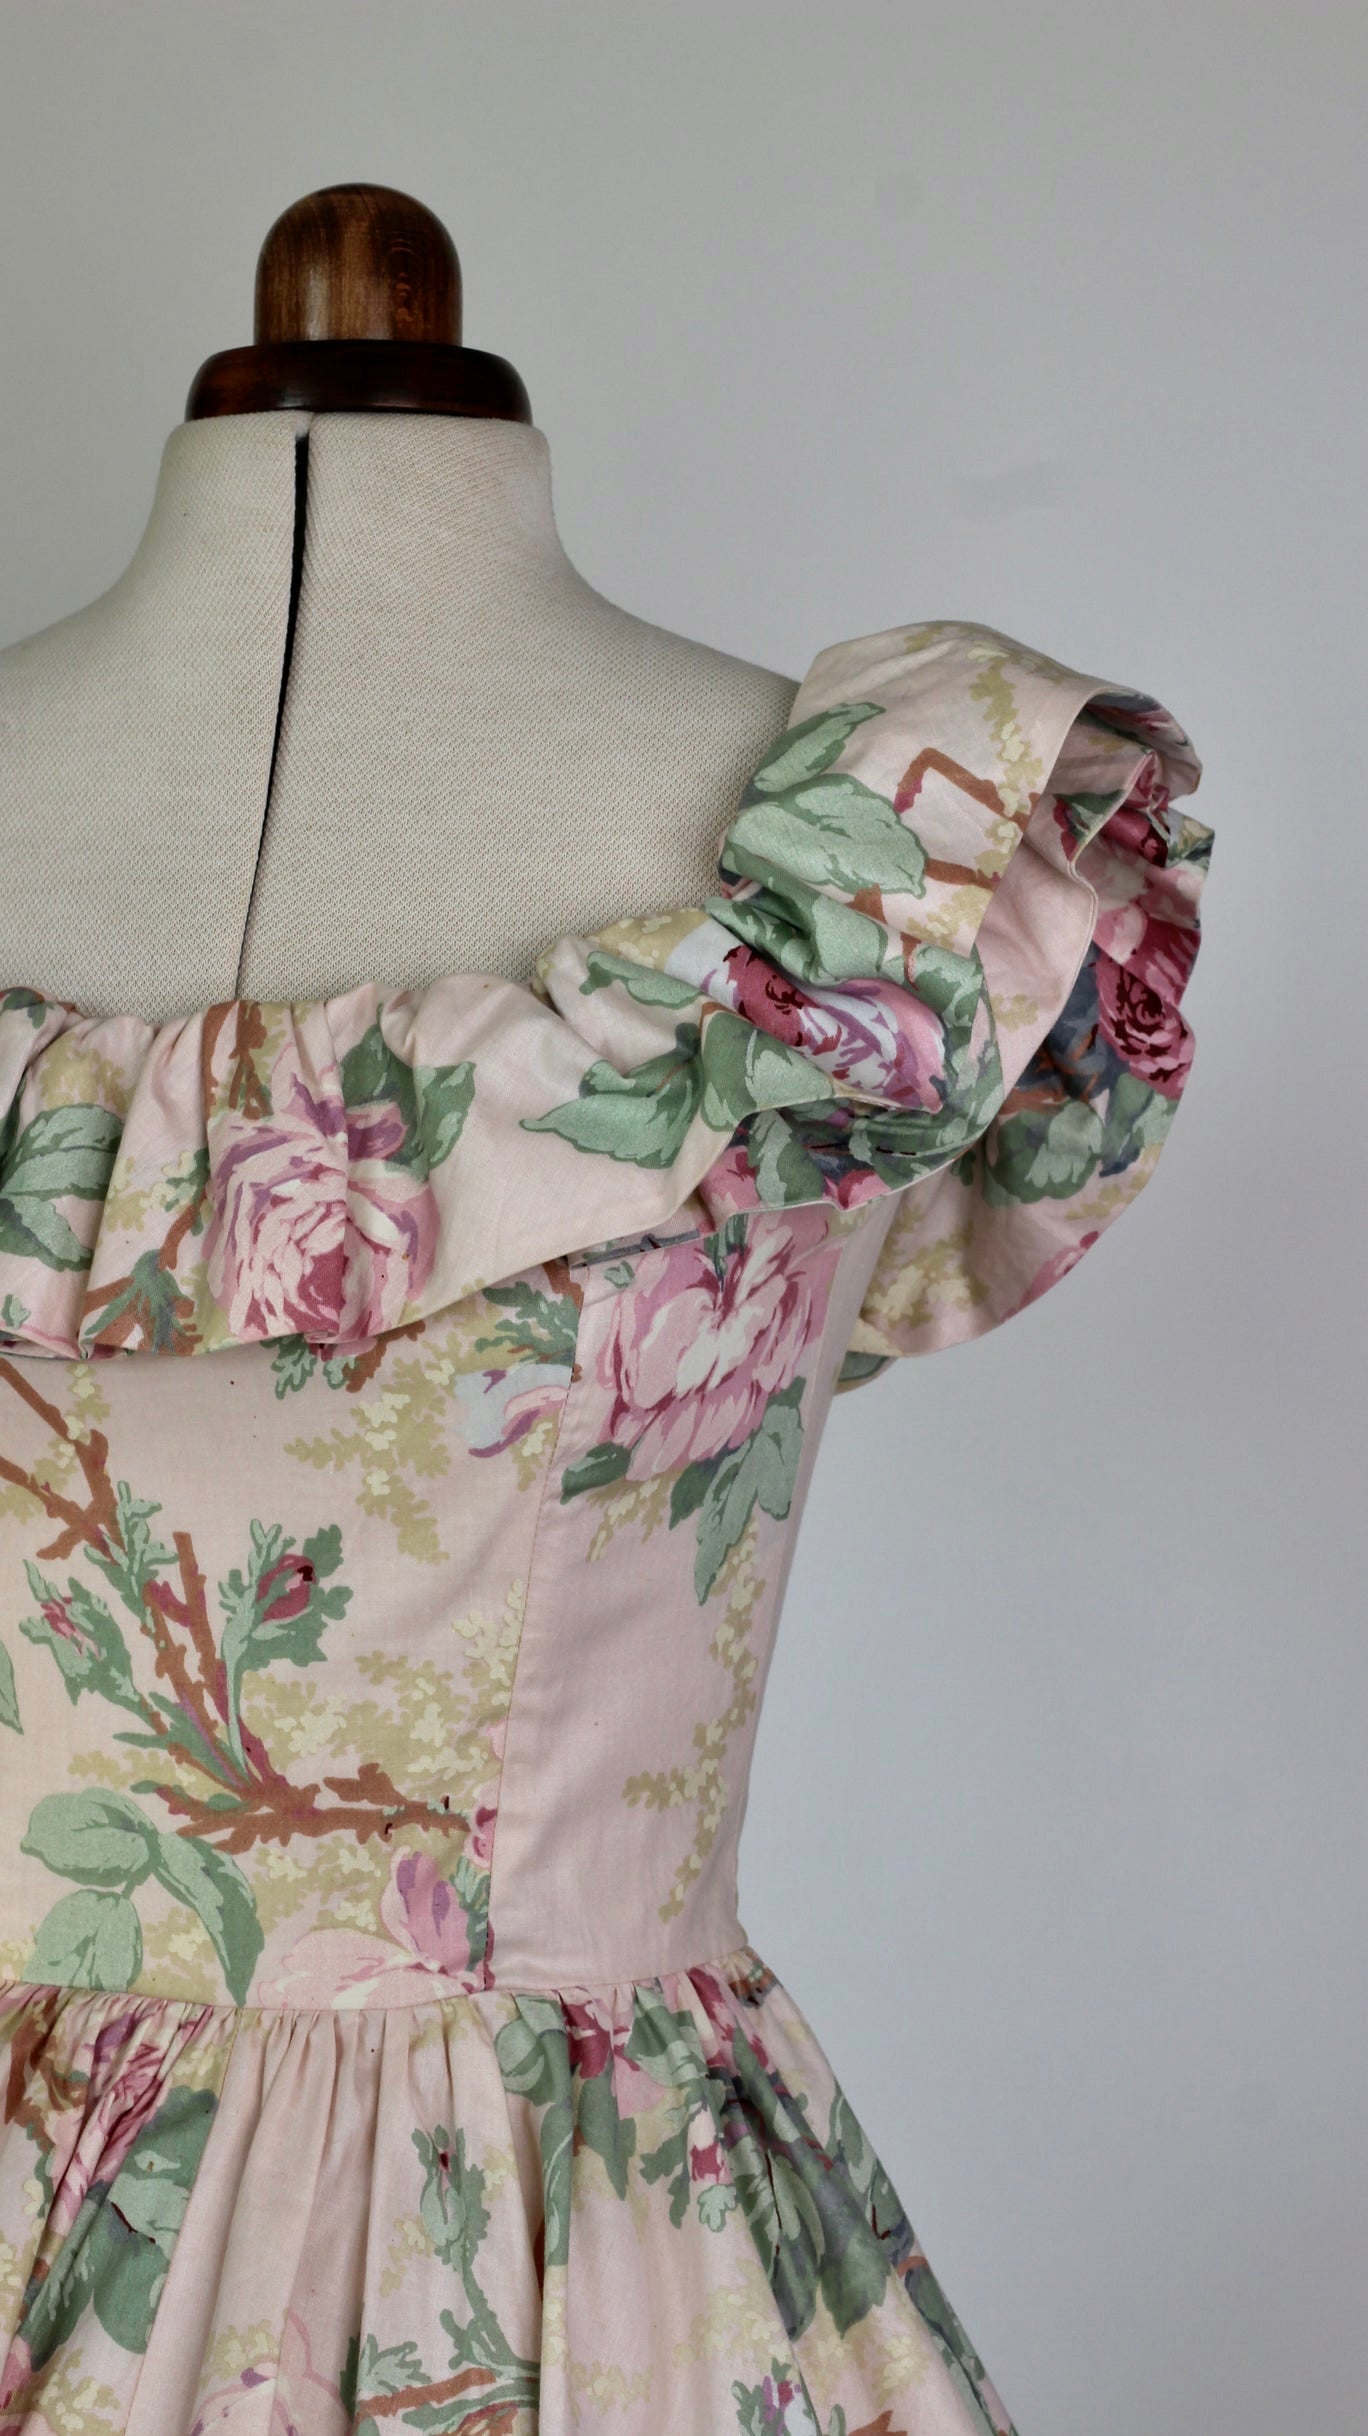 1980s Vintage Sleeveless Floral Dress//Corsage Top//Size S